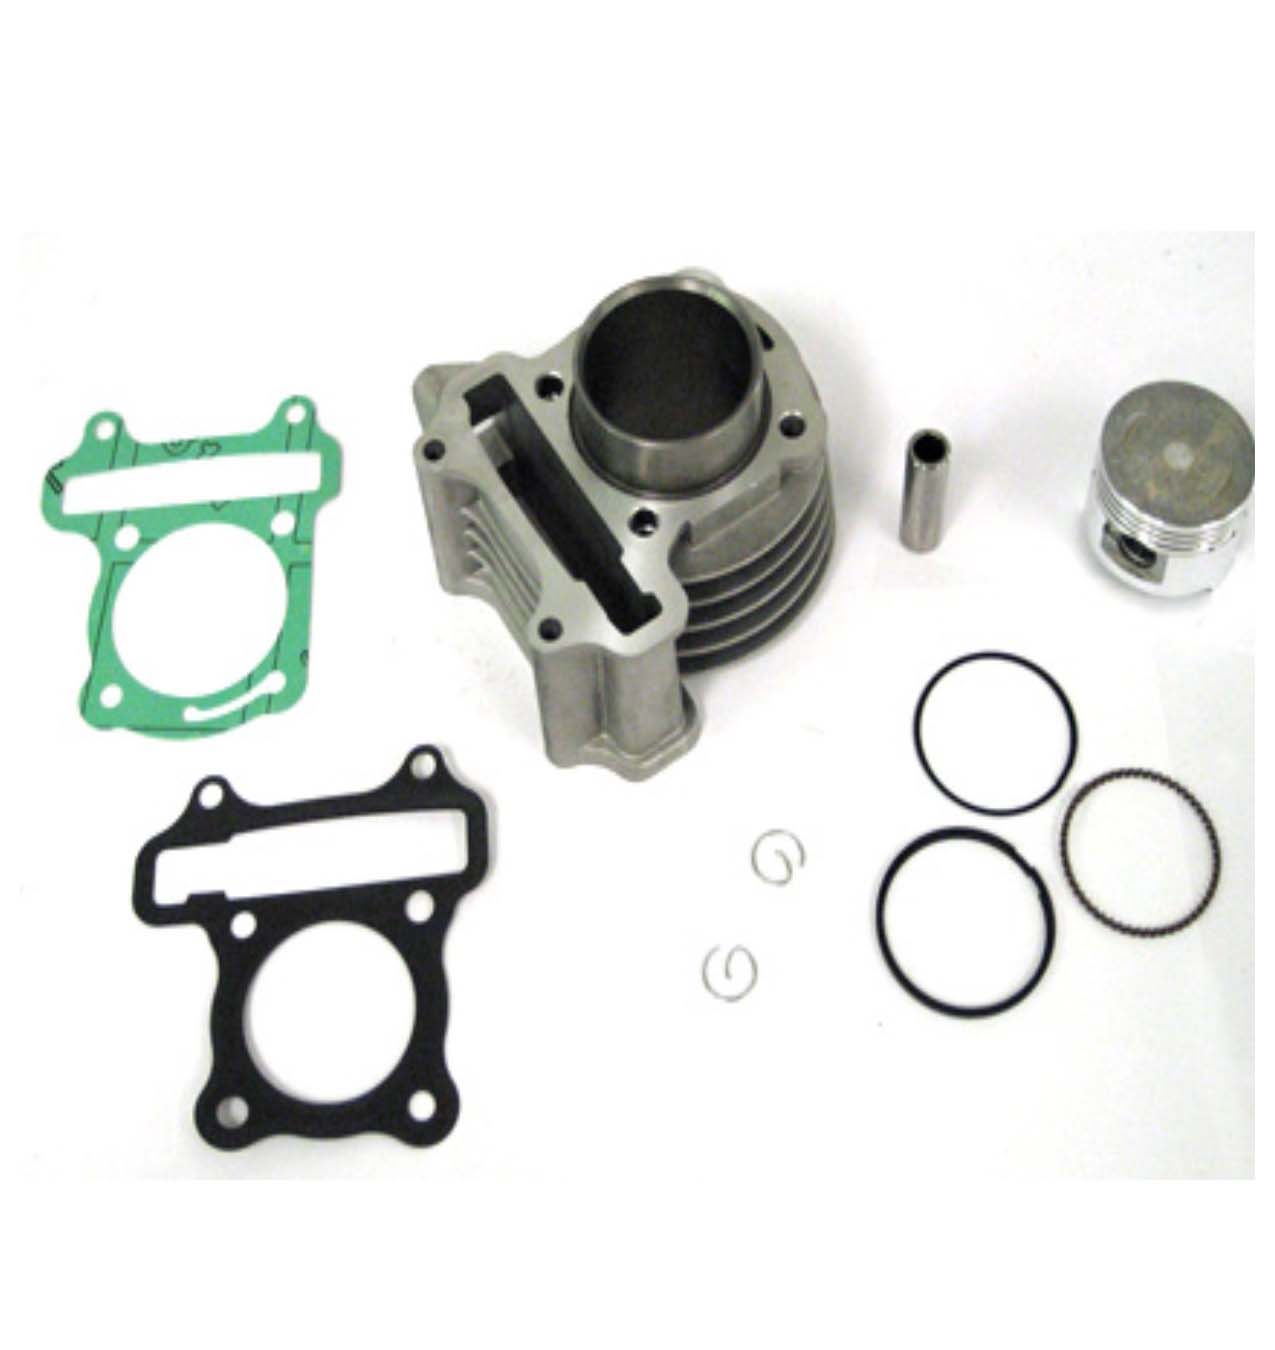 49cc (Standard) Cylinder Piston Top End Kit For GY6-50 QMB139 Chinese Scooter Motors. Bore=39mm - Click Image to Close